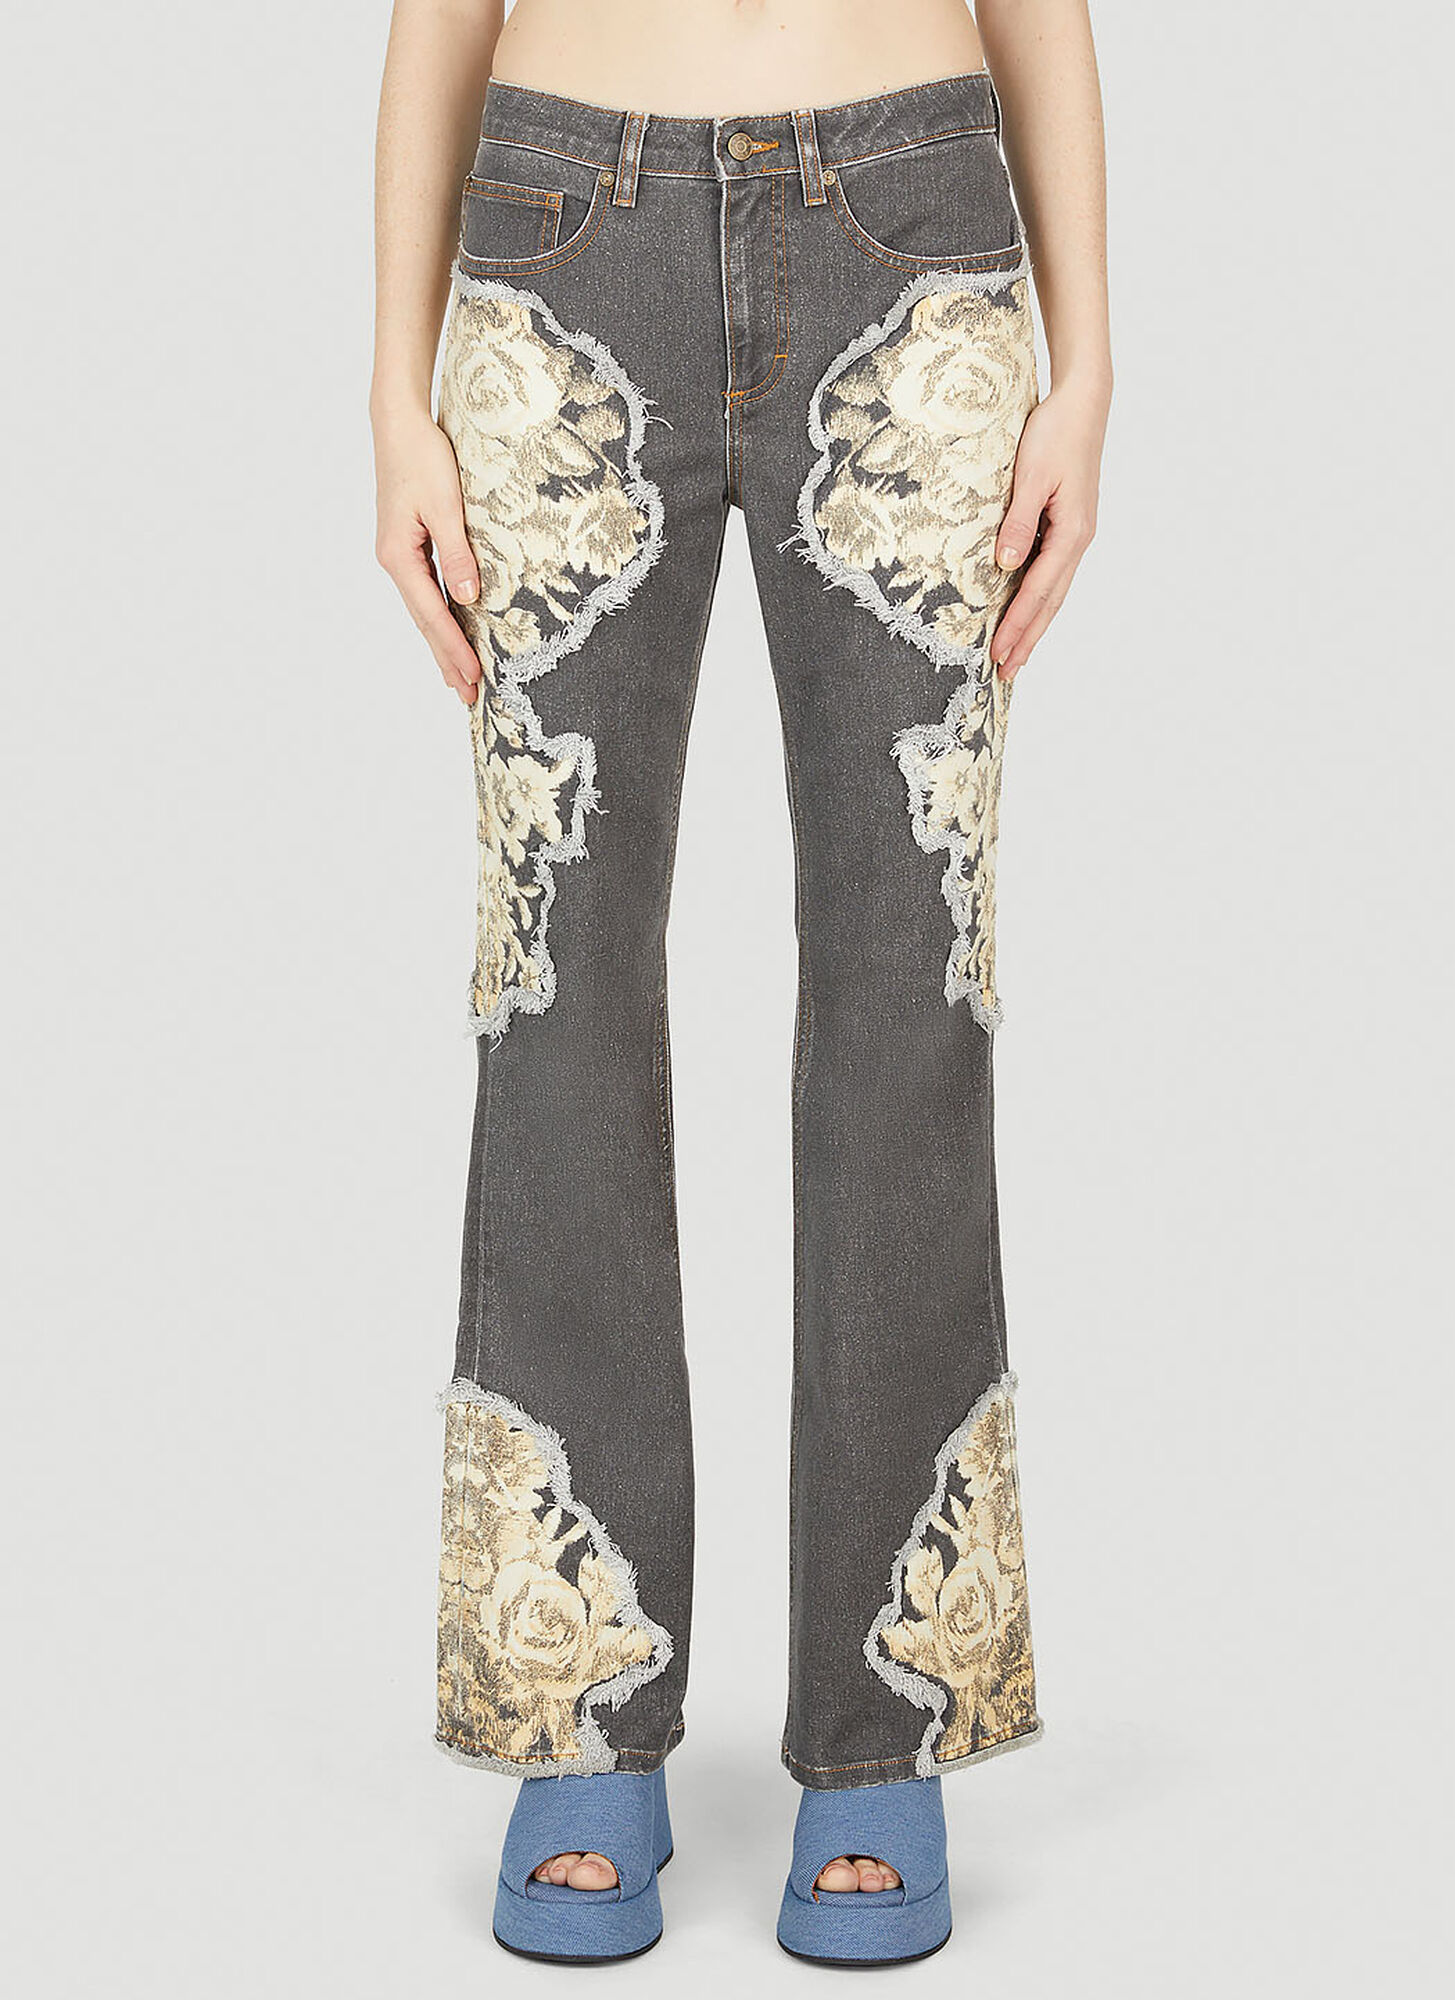 Guess Usa Floral Printed Flared Jeans Female Grey